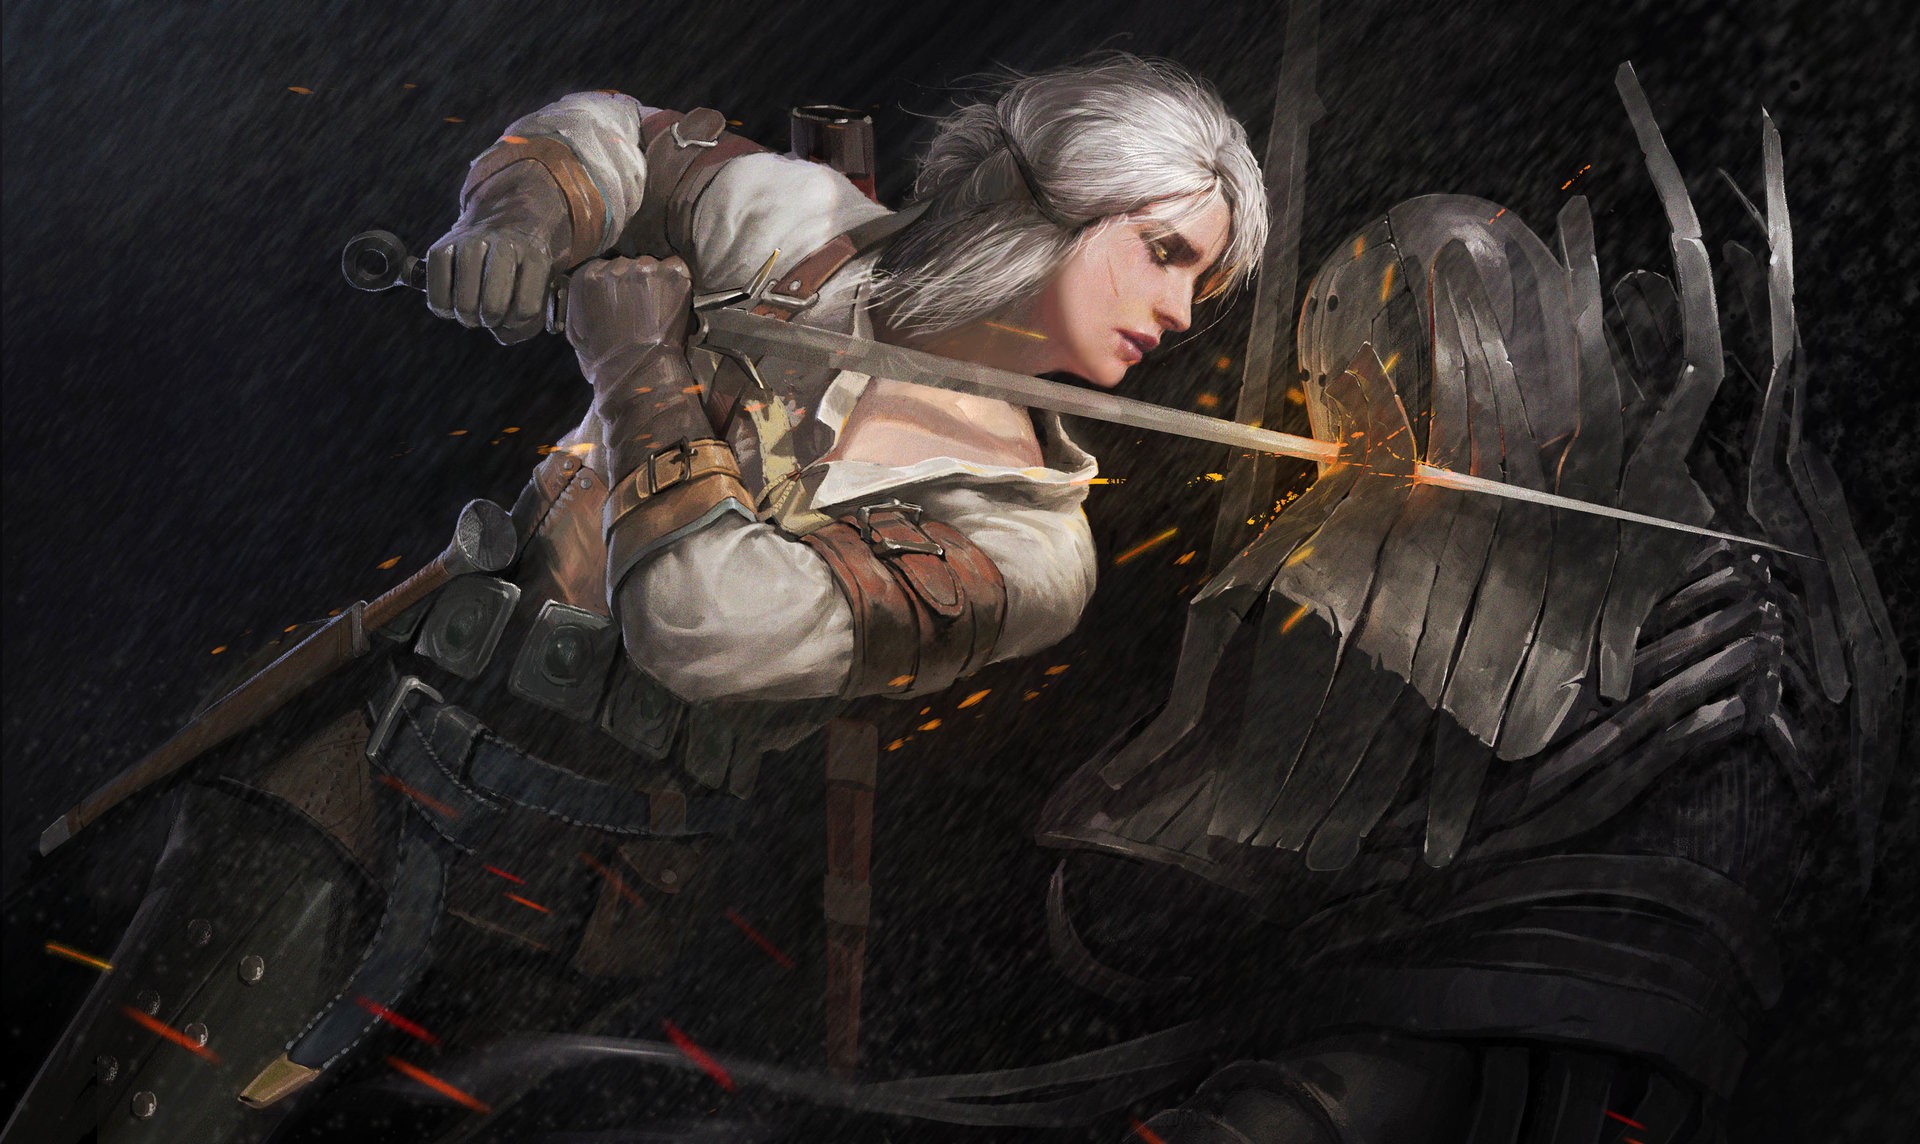 General 1920x1144 The Witcher Cirilla Fiona Elen Riannon The Witcher 3: Wild Hunt fantasy girl fantasy art video games CD Projekt RED video game girls women with swords sword RPG PC gaming video game characters